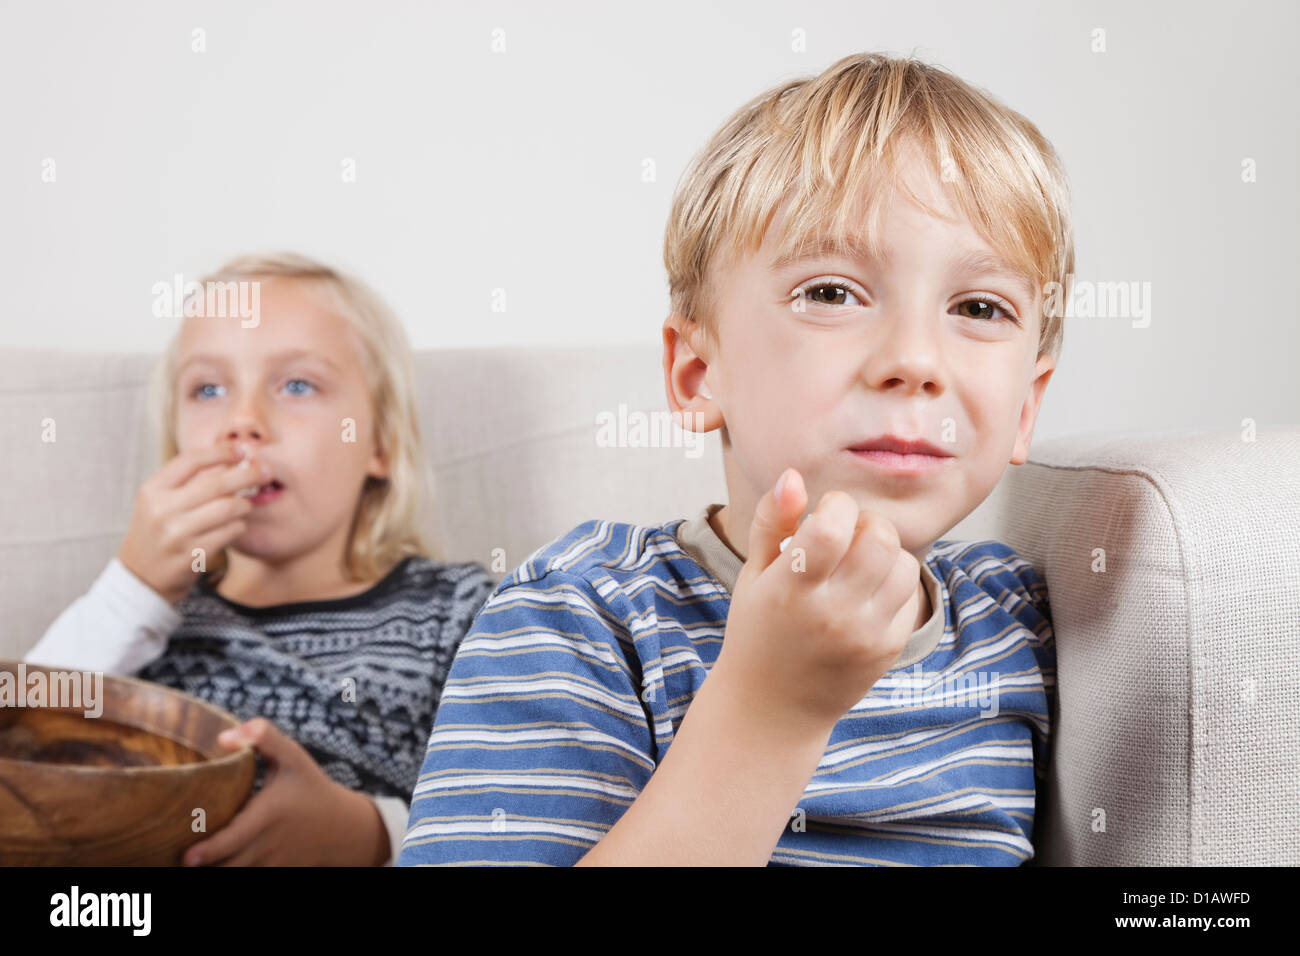 Portrait young boy sister watching TV eating popcorn Stock Photo